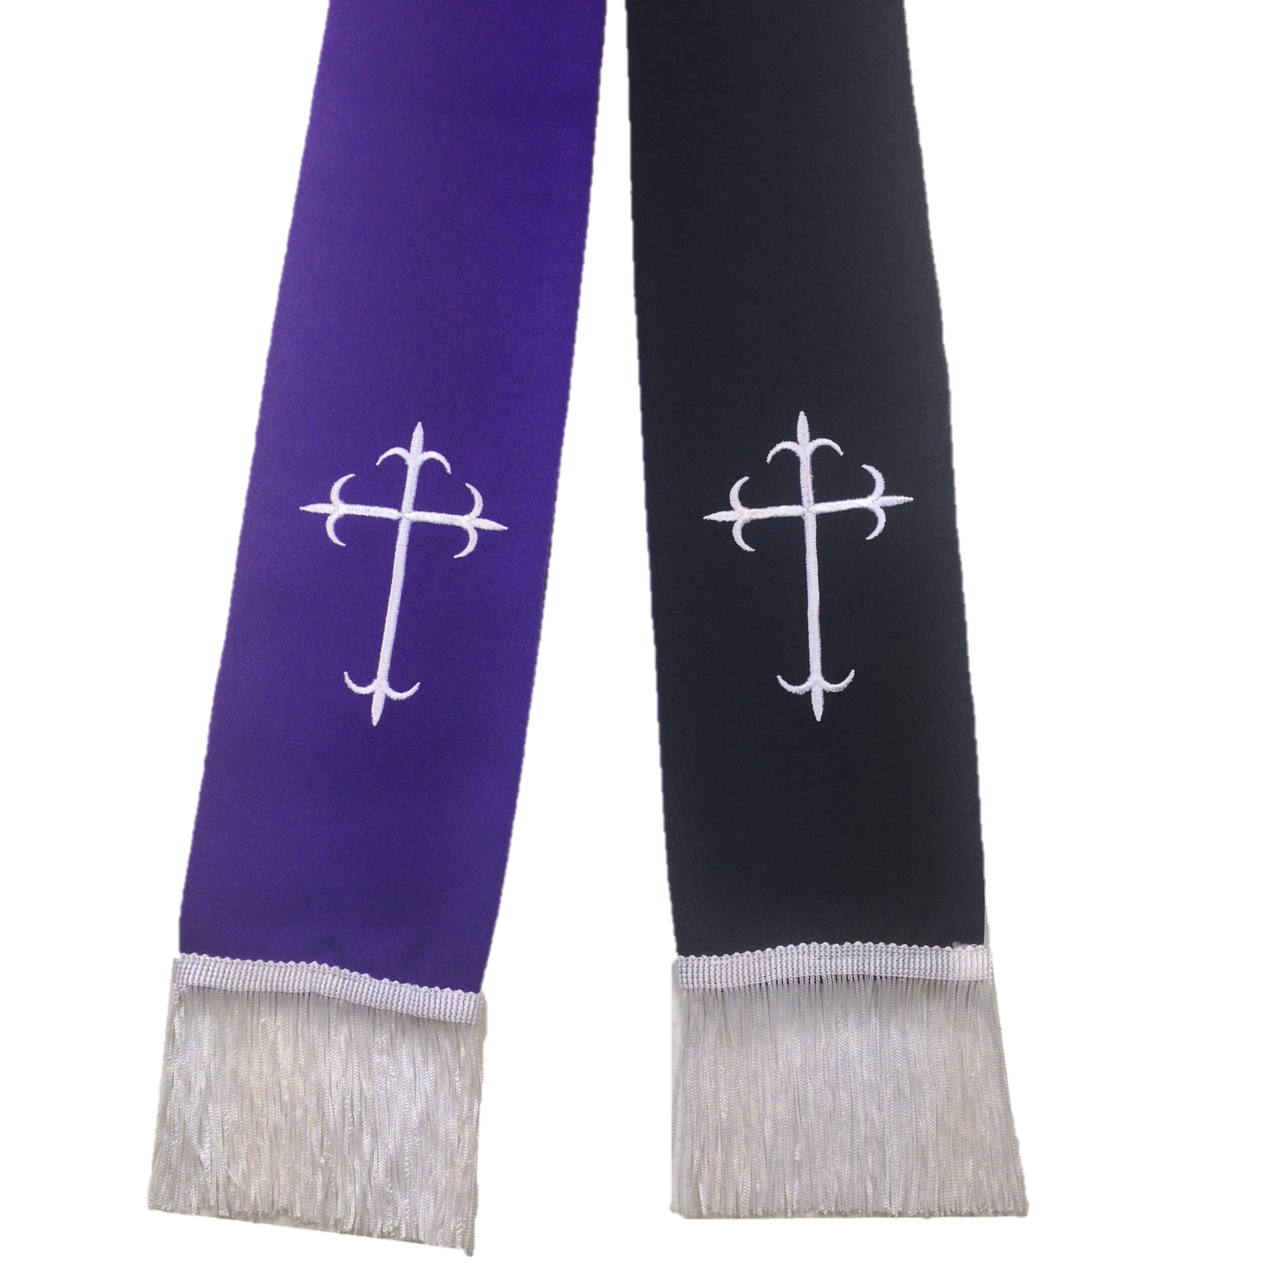 Reversible Clergy Stole - Black/White AND Purple/White